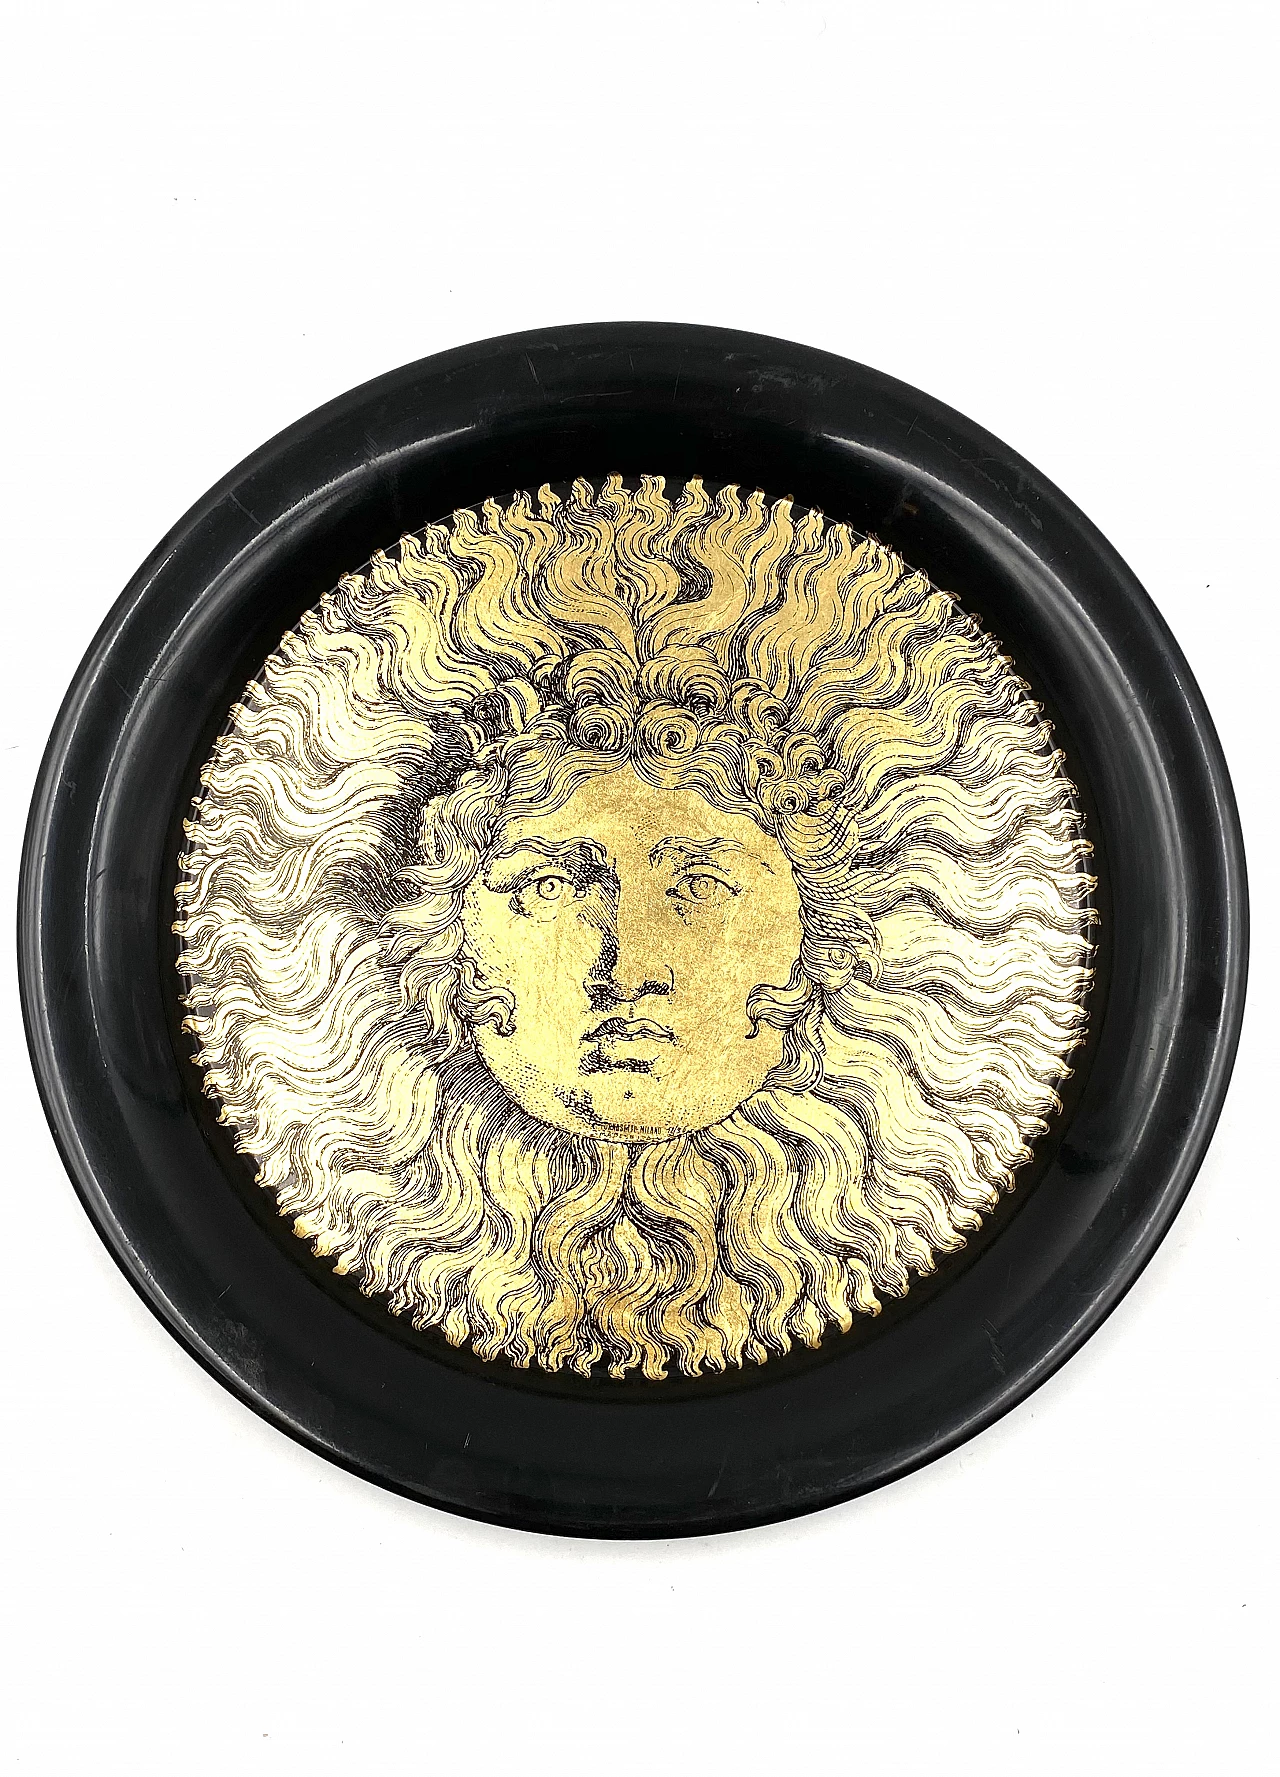 Metal Re Sole tray by Piero Fornasetti, 1950s 16